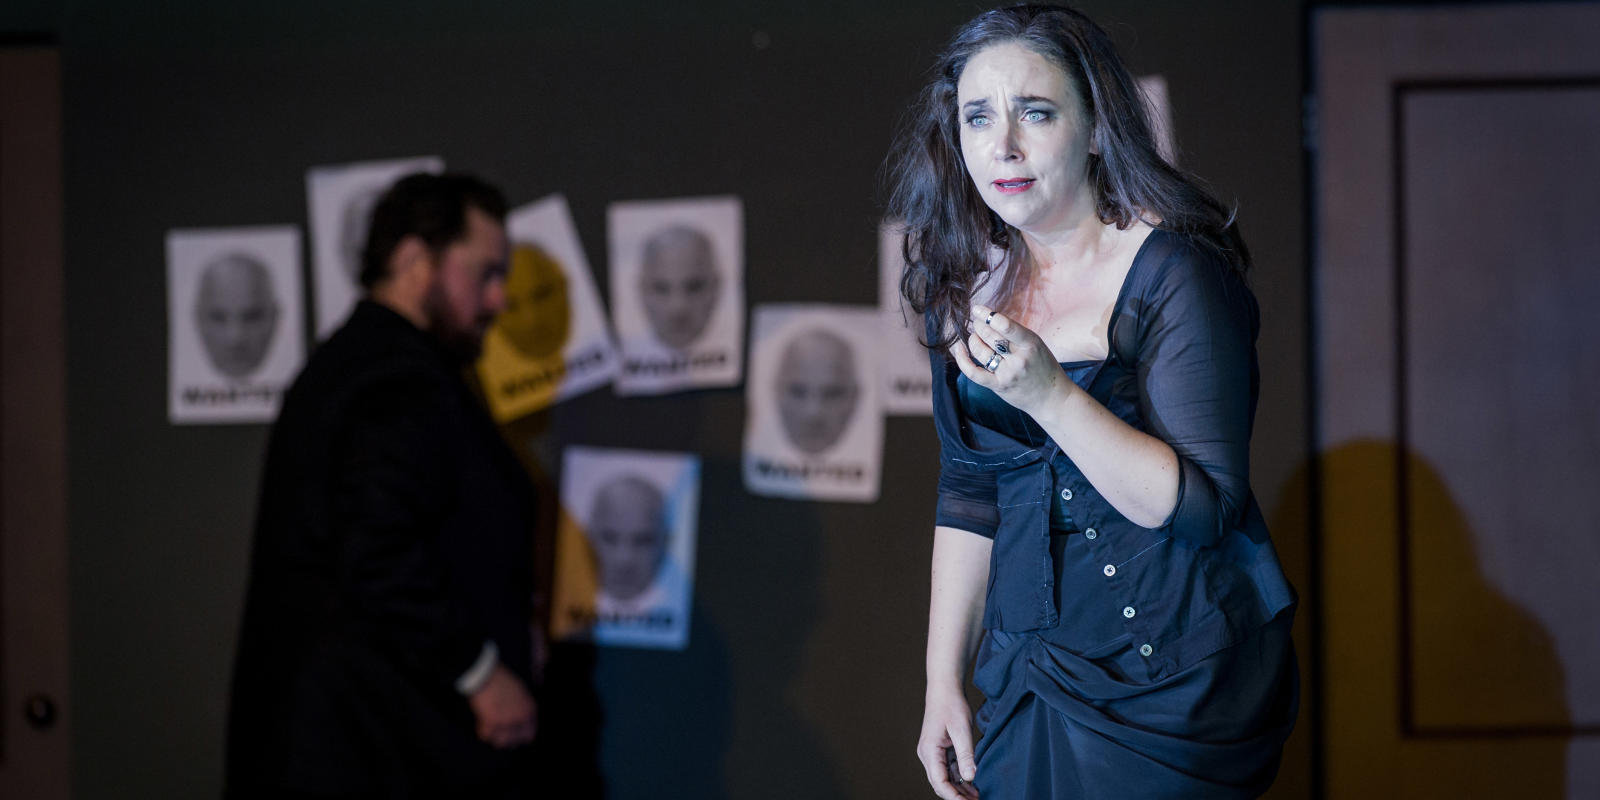 woman looking sad with man and posters with faces on them in the background in Don Giovanni